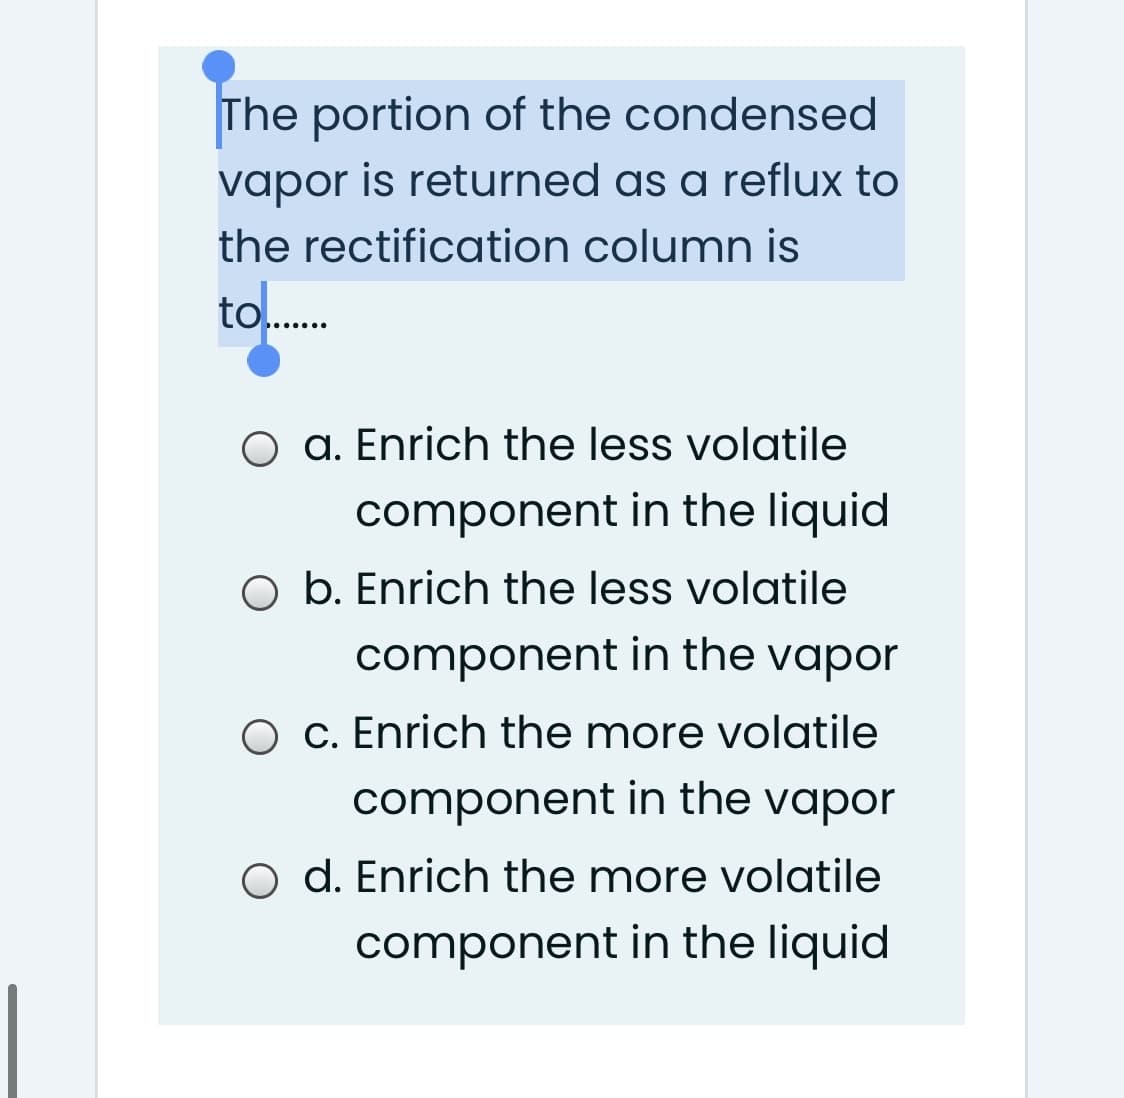 The portion of the condensed
vapor is returned as a reflux to
the rectification column is
to.
O a. Enrich the less volatile
component in the liquid
O b. Enrich the less volatile
component in the vapor
O c. Enrich the more volatile
component in the vapor
d. Enrich the more volatile
component in the liquid
